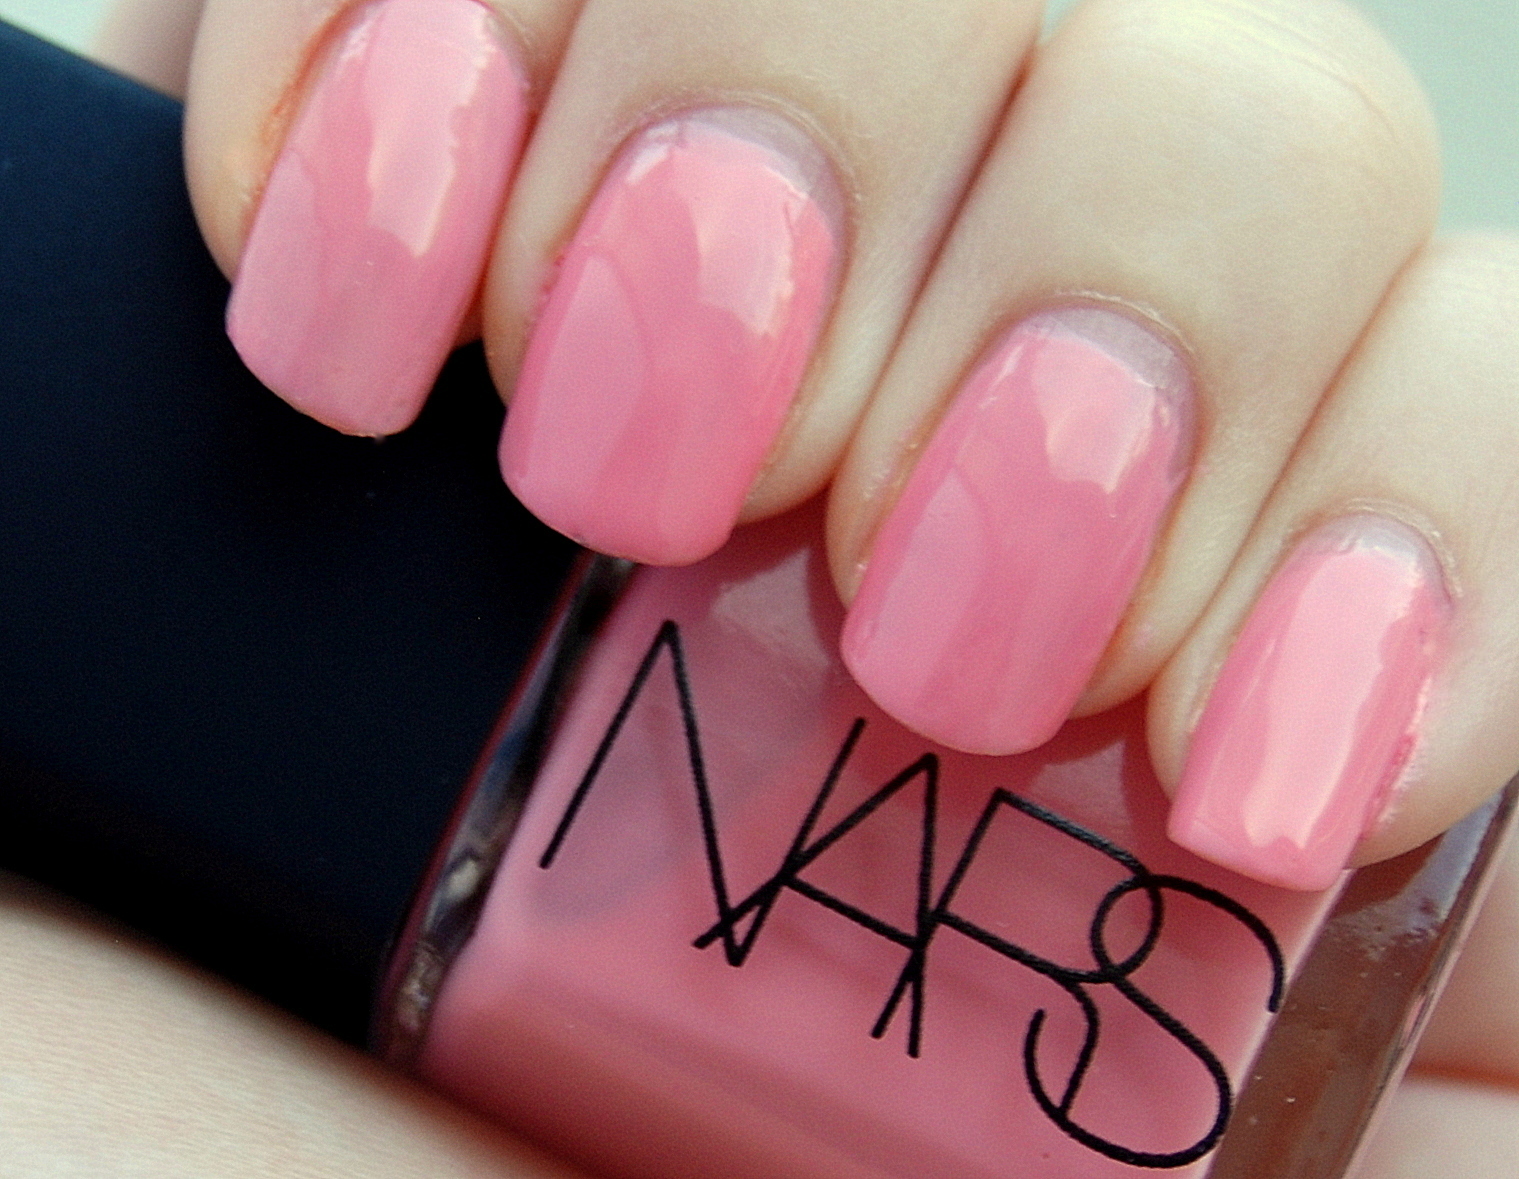 Nicole Reviews Beauty: NARS Nail Polish in Trouville Review and 